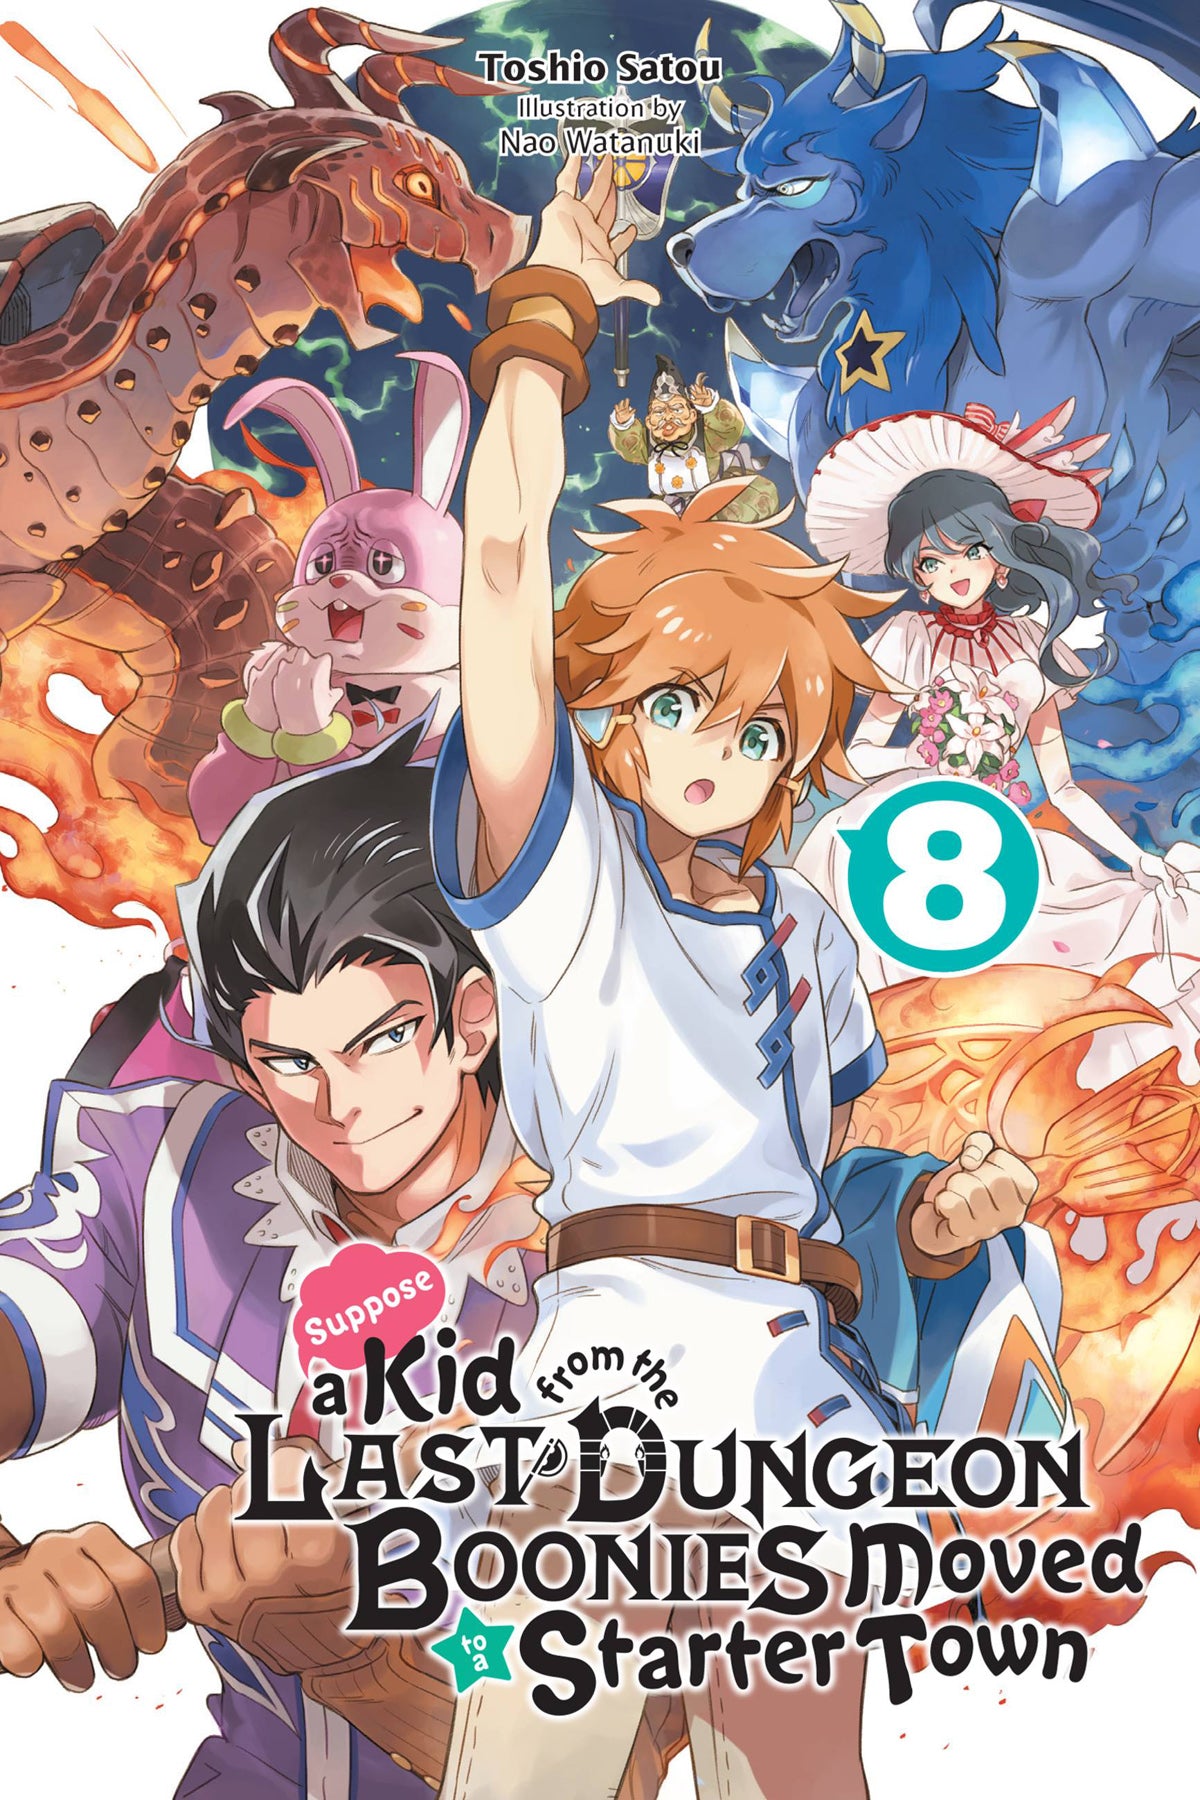 Suppose a Kid from the Last Dungeon Boonies Moved to a Starter Town Vol. 08 (Light Novel)